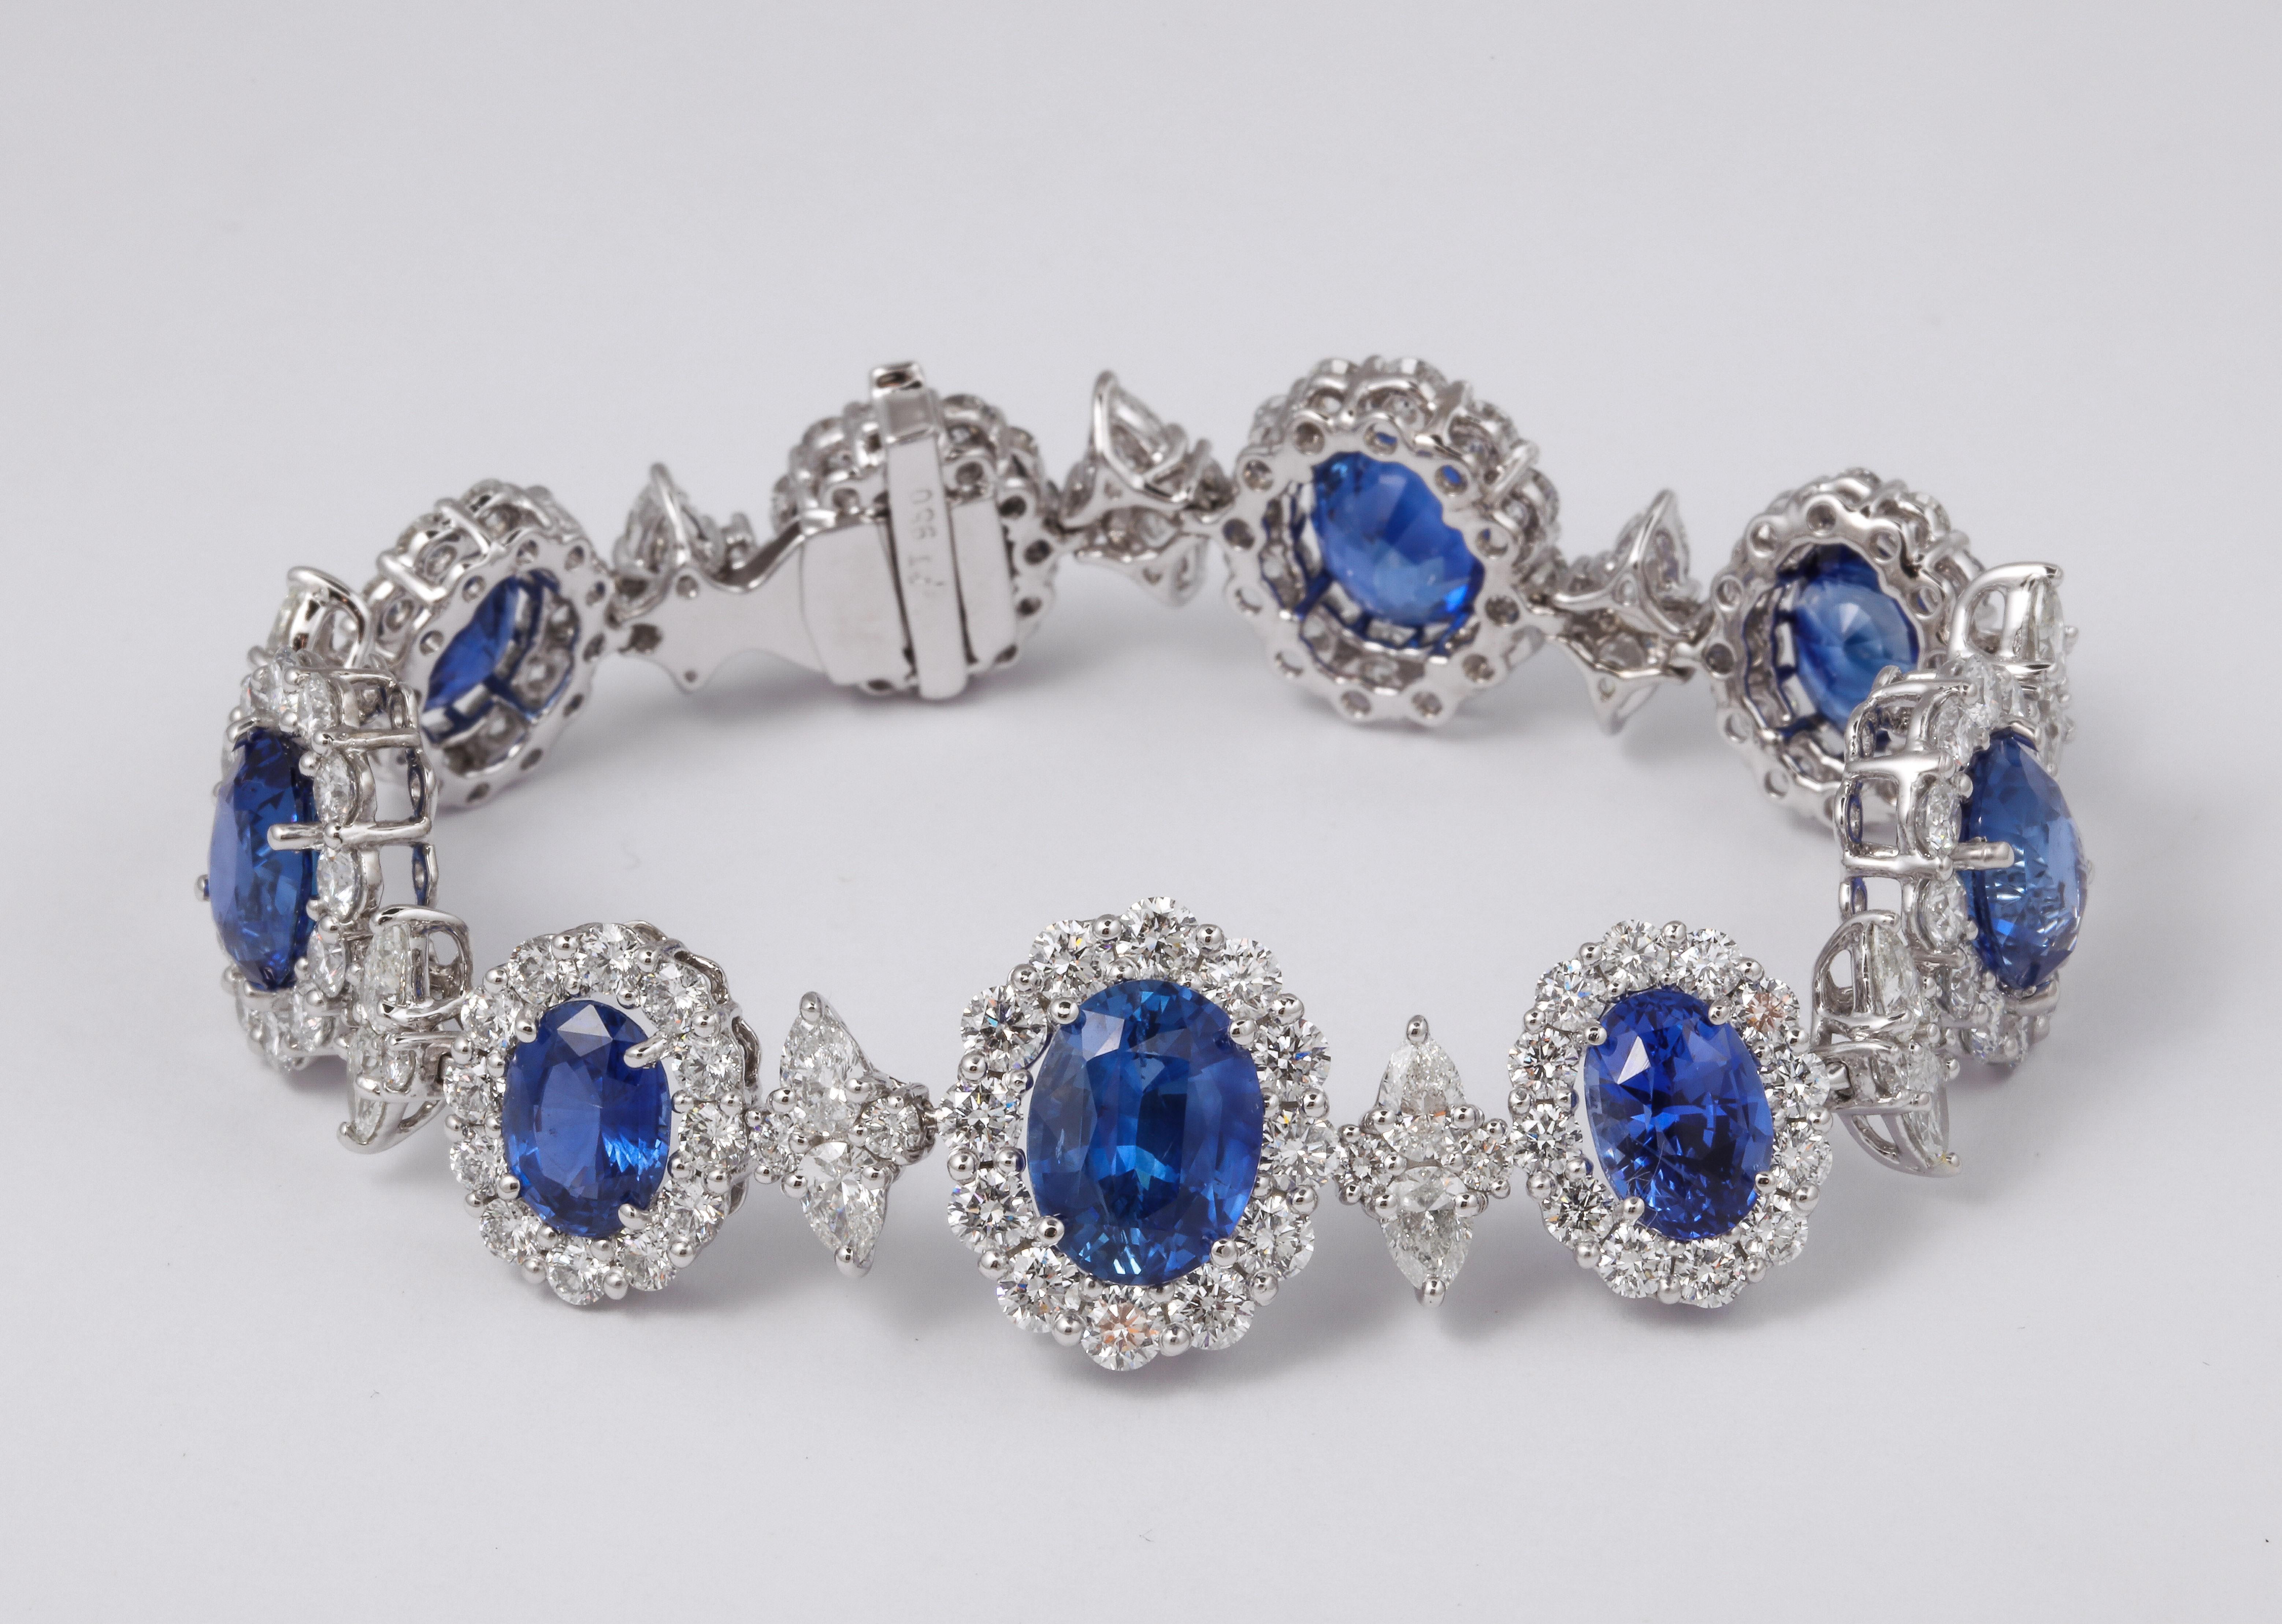 
Classic sapphire and diamond bracelet.

32.86 carats of Fine Blue Ceylon Sapphire 

16.84 carats of white round brilliant and pear shape diamonds. 

Just over 7 inches in length, .70 inches wide. 

Certified by Christian Dunaigre of Switzerland